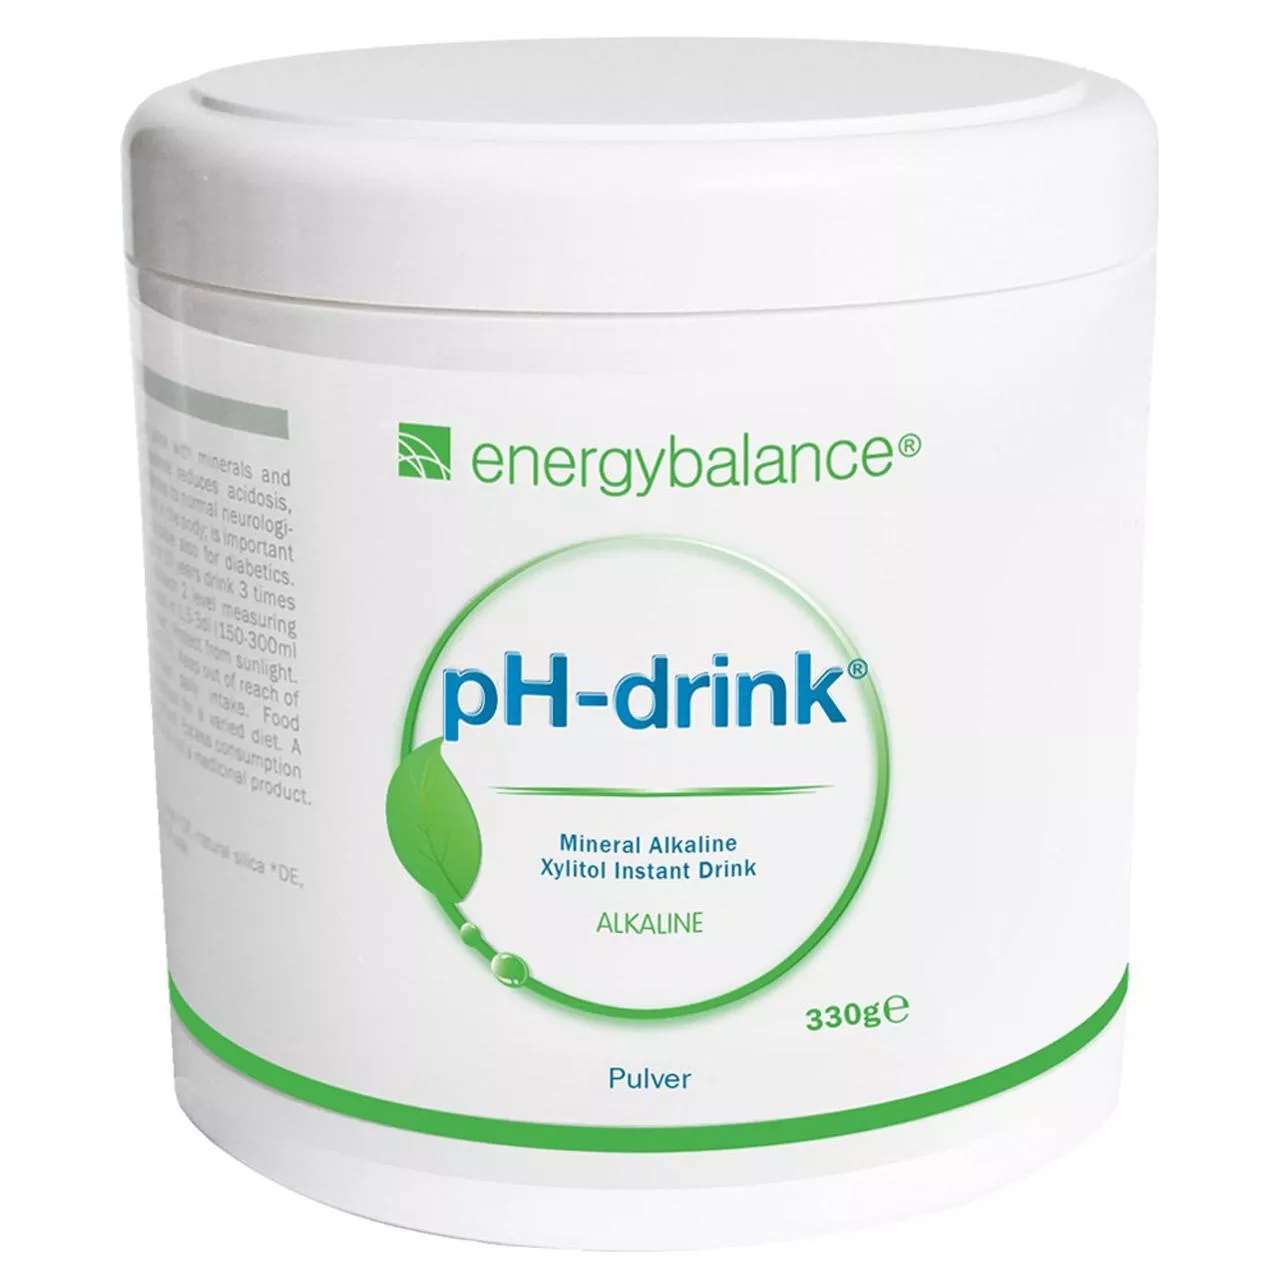 pH-drink Xylitol Basendrink, 330 g Pulver